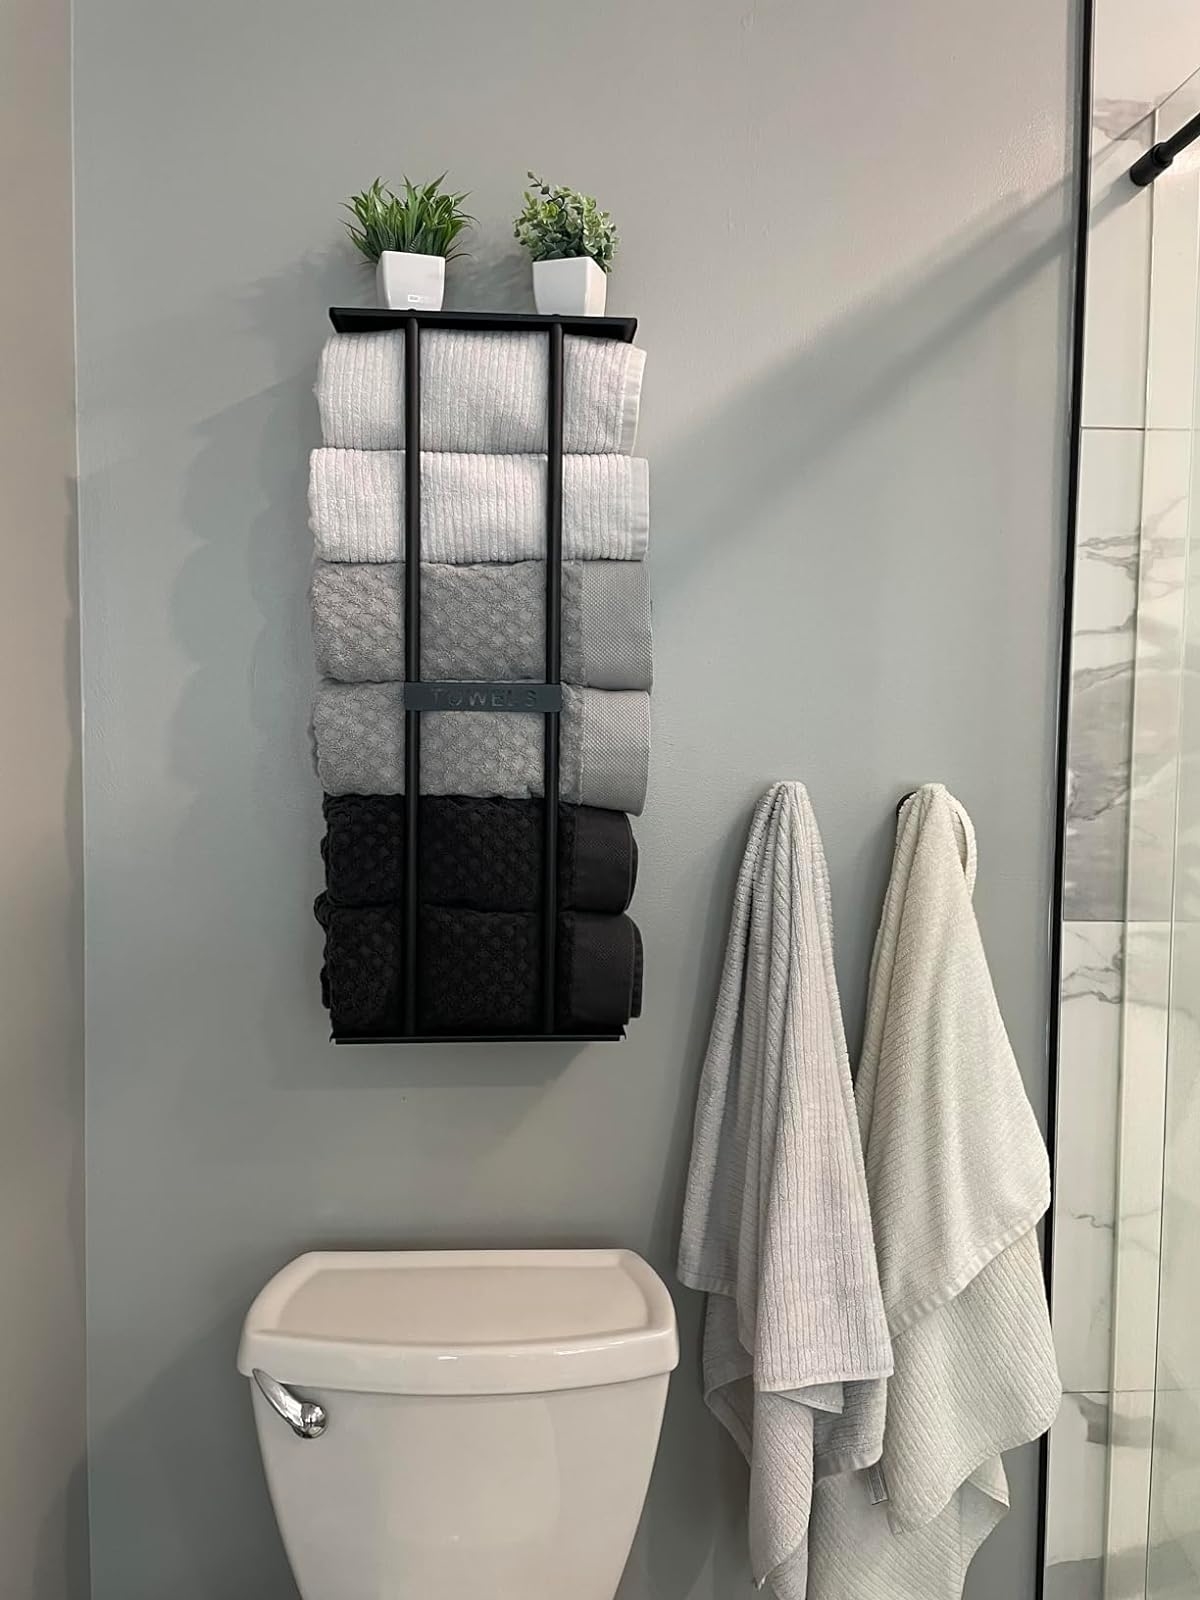 A wall-mounted towel rack with variously sized gray and black towels, above a toilet, with two small plants on top